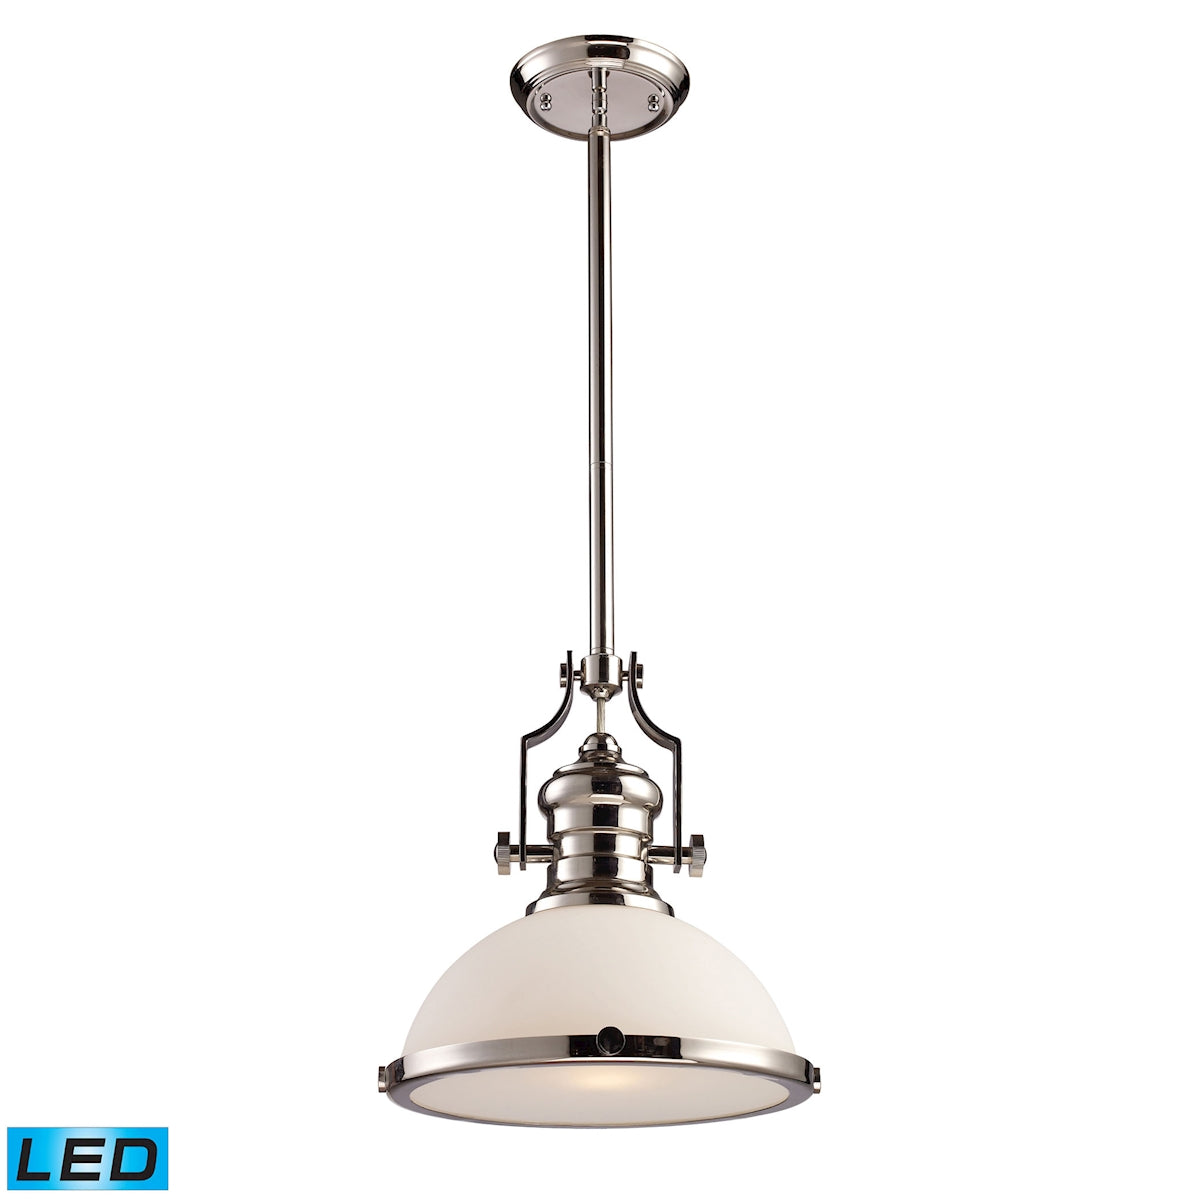 ELK Lighting 66113-1-LED Chadwick 1-Light Pendant in Polished Nickel with White Glass - Includes LED Bulb